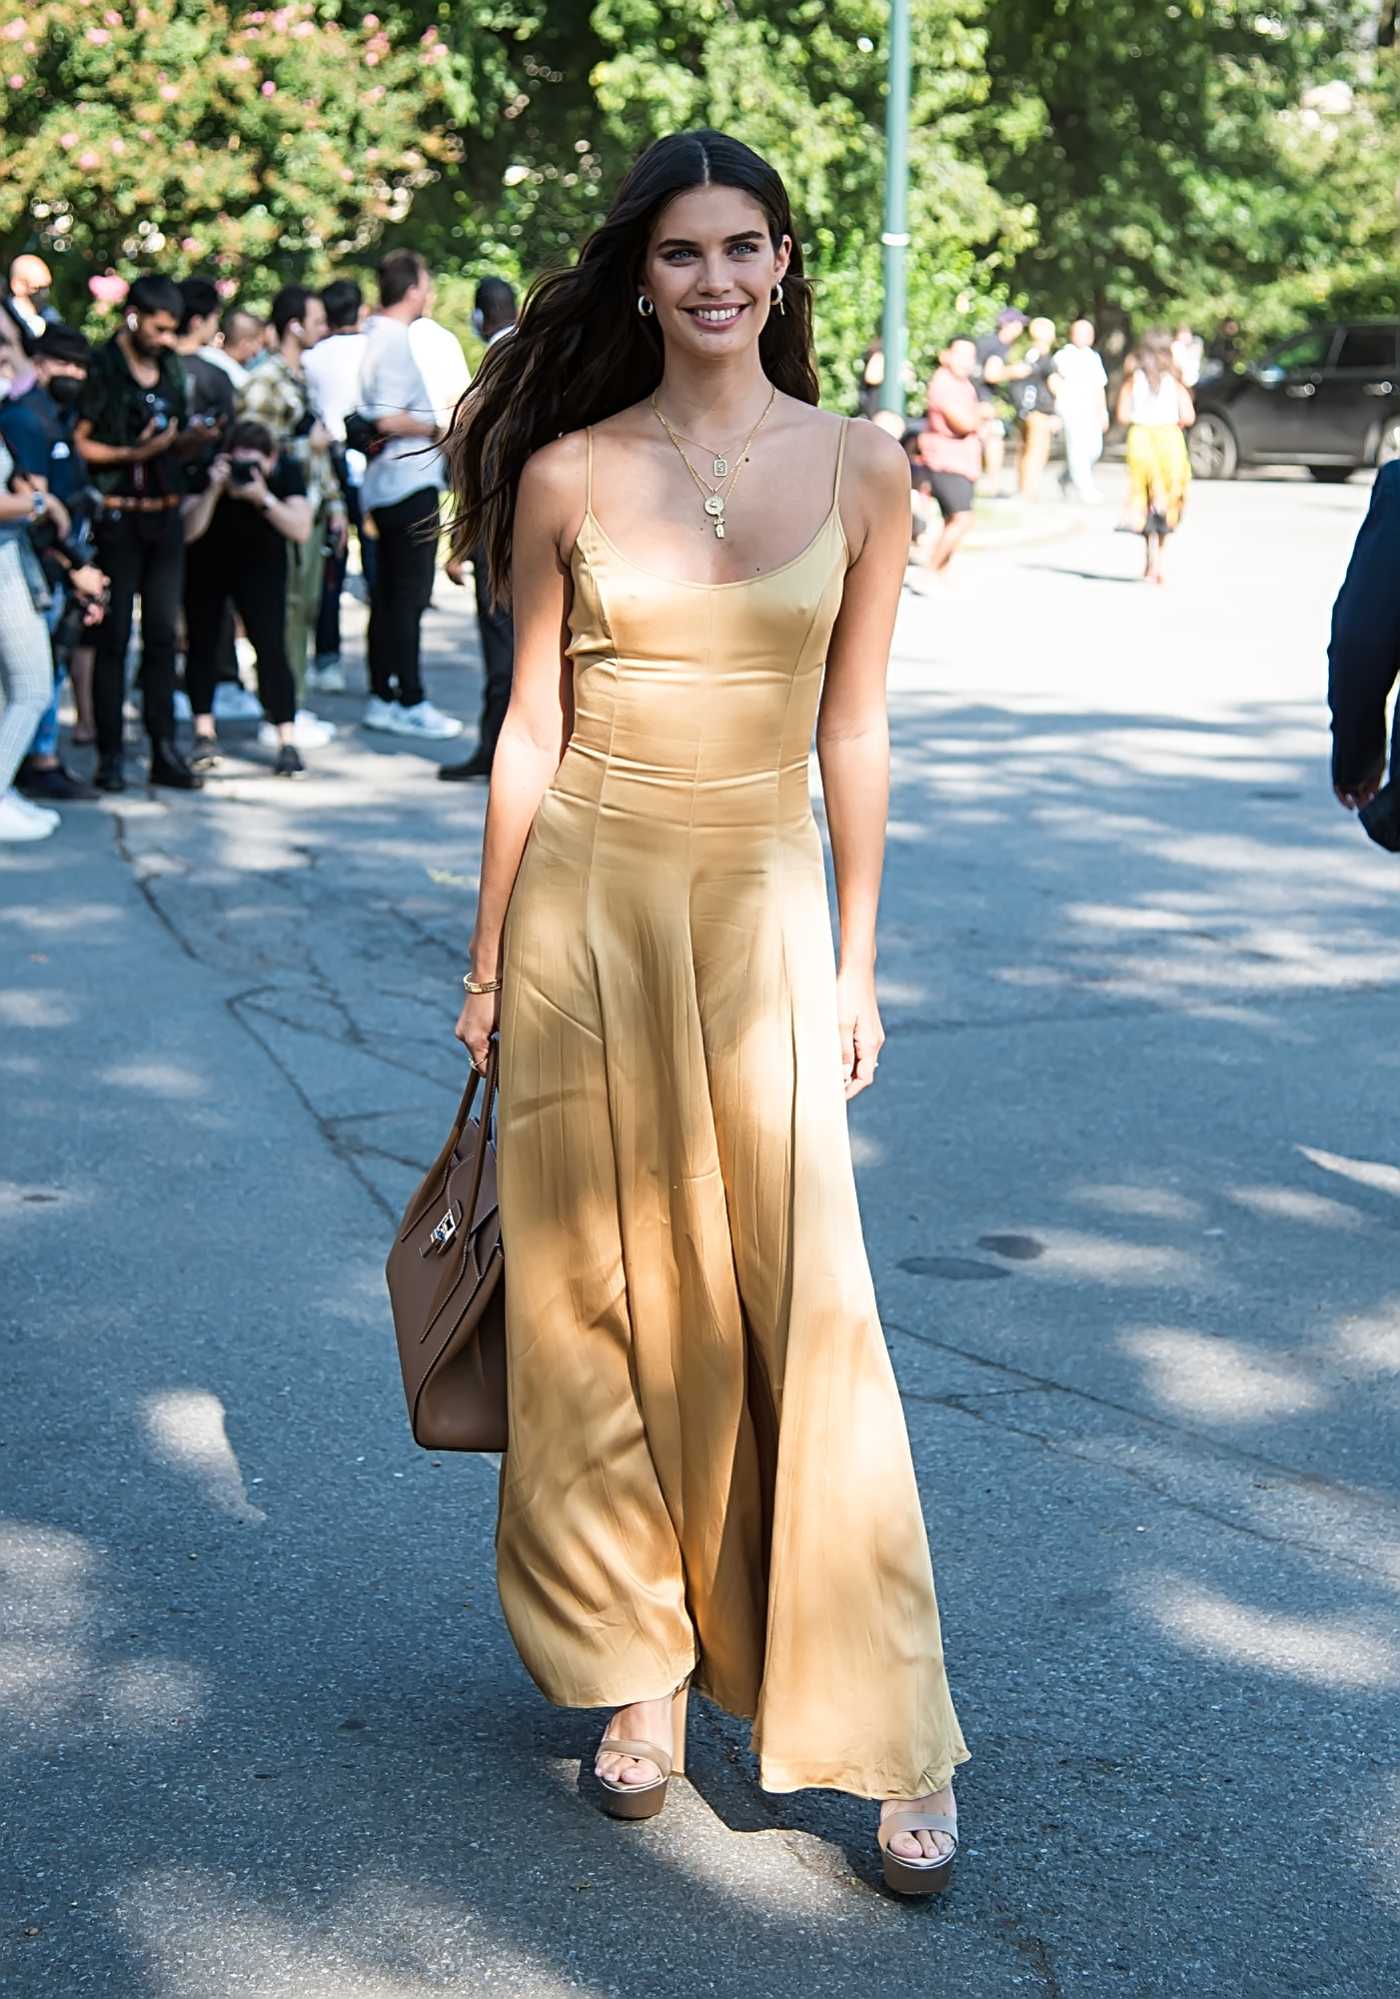 Sara Sampaio in a Yellow Dress Arrives at the Michael Kors Collection SP22 Runway Show During NYFW in New York City 09/10/2021